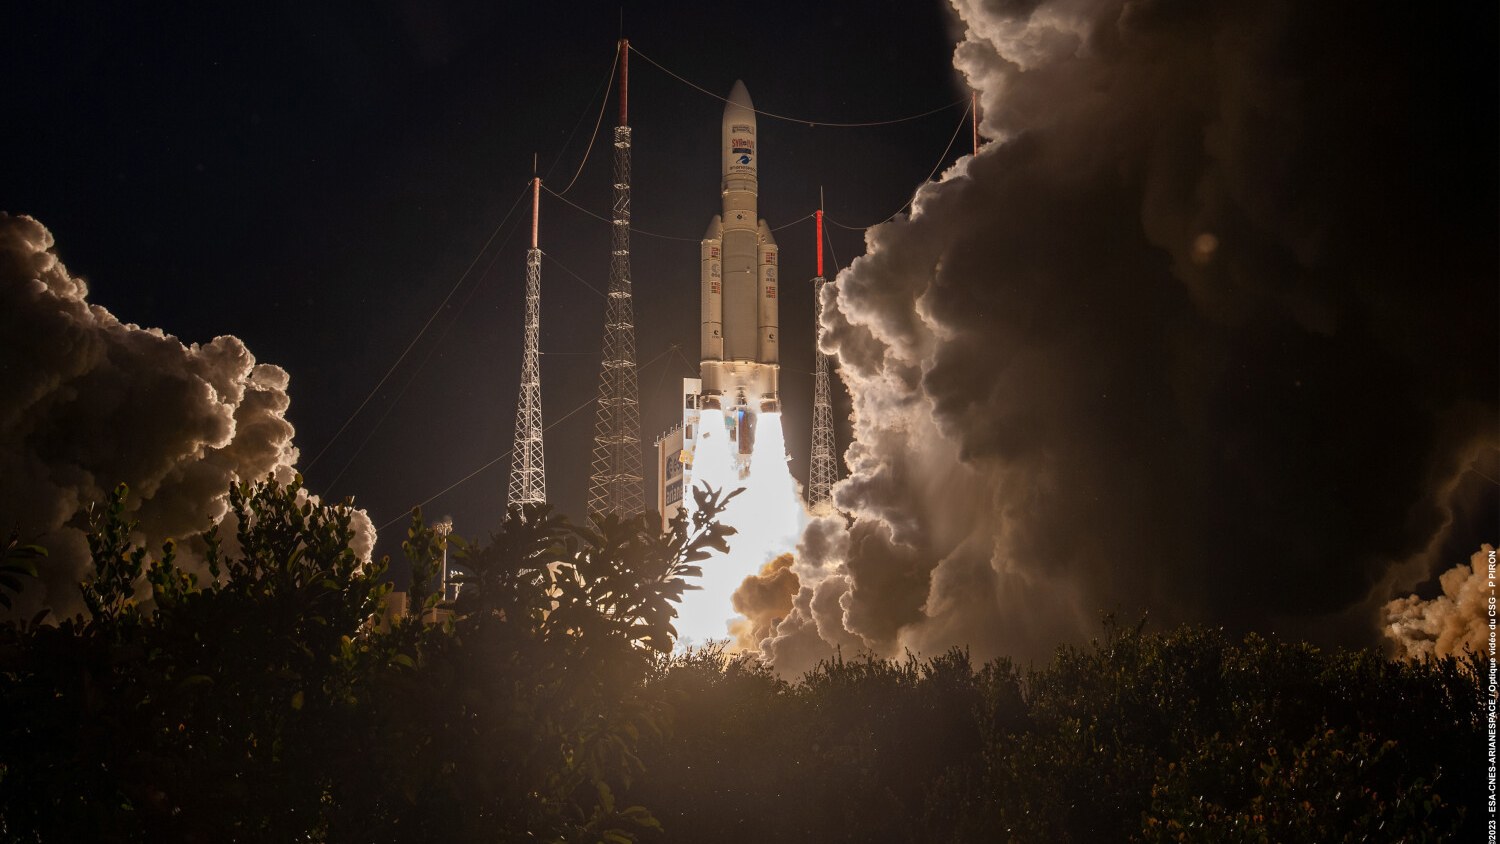 Lift-off of the Ariane 5 launcher with the communications satellite Heinrich Hertz on board